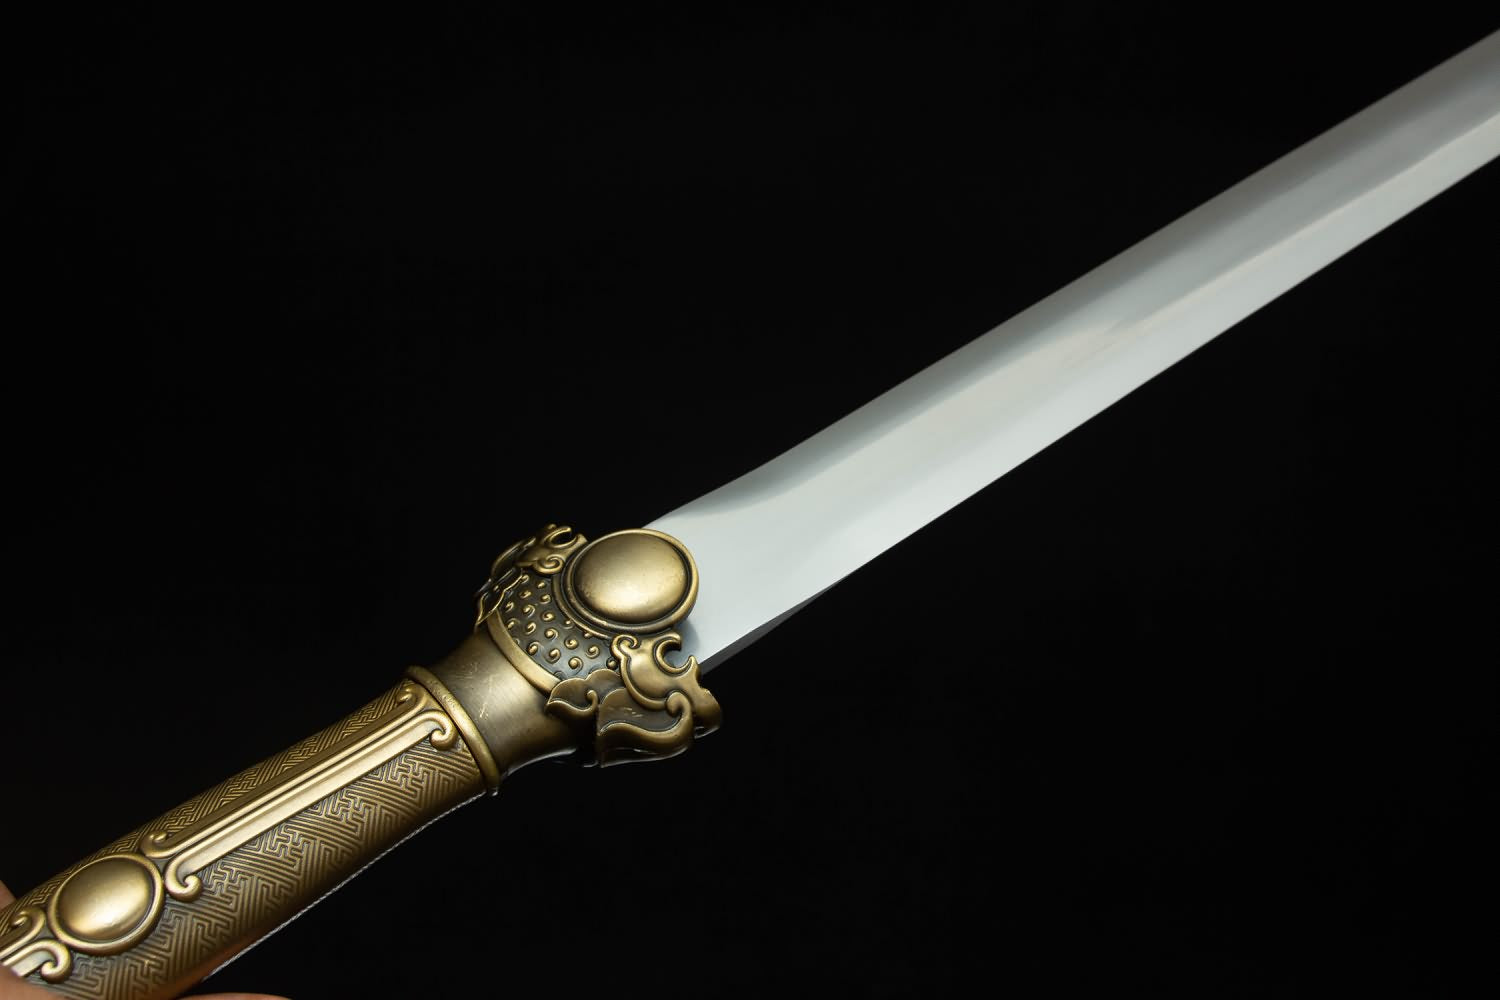 Hand Forged High Carbon Steel Tang Sword - Traditional Chinese Weapon with Real Wood Handle and Faux Leather Sheath